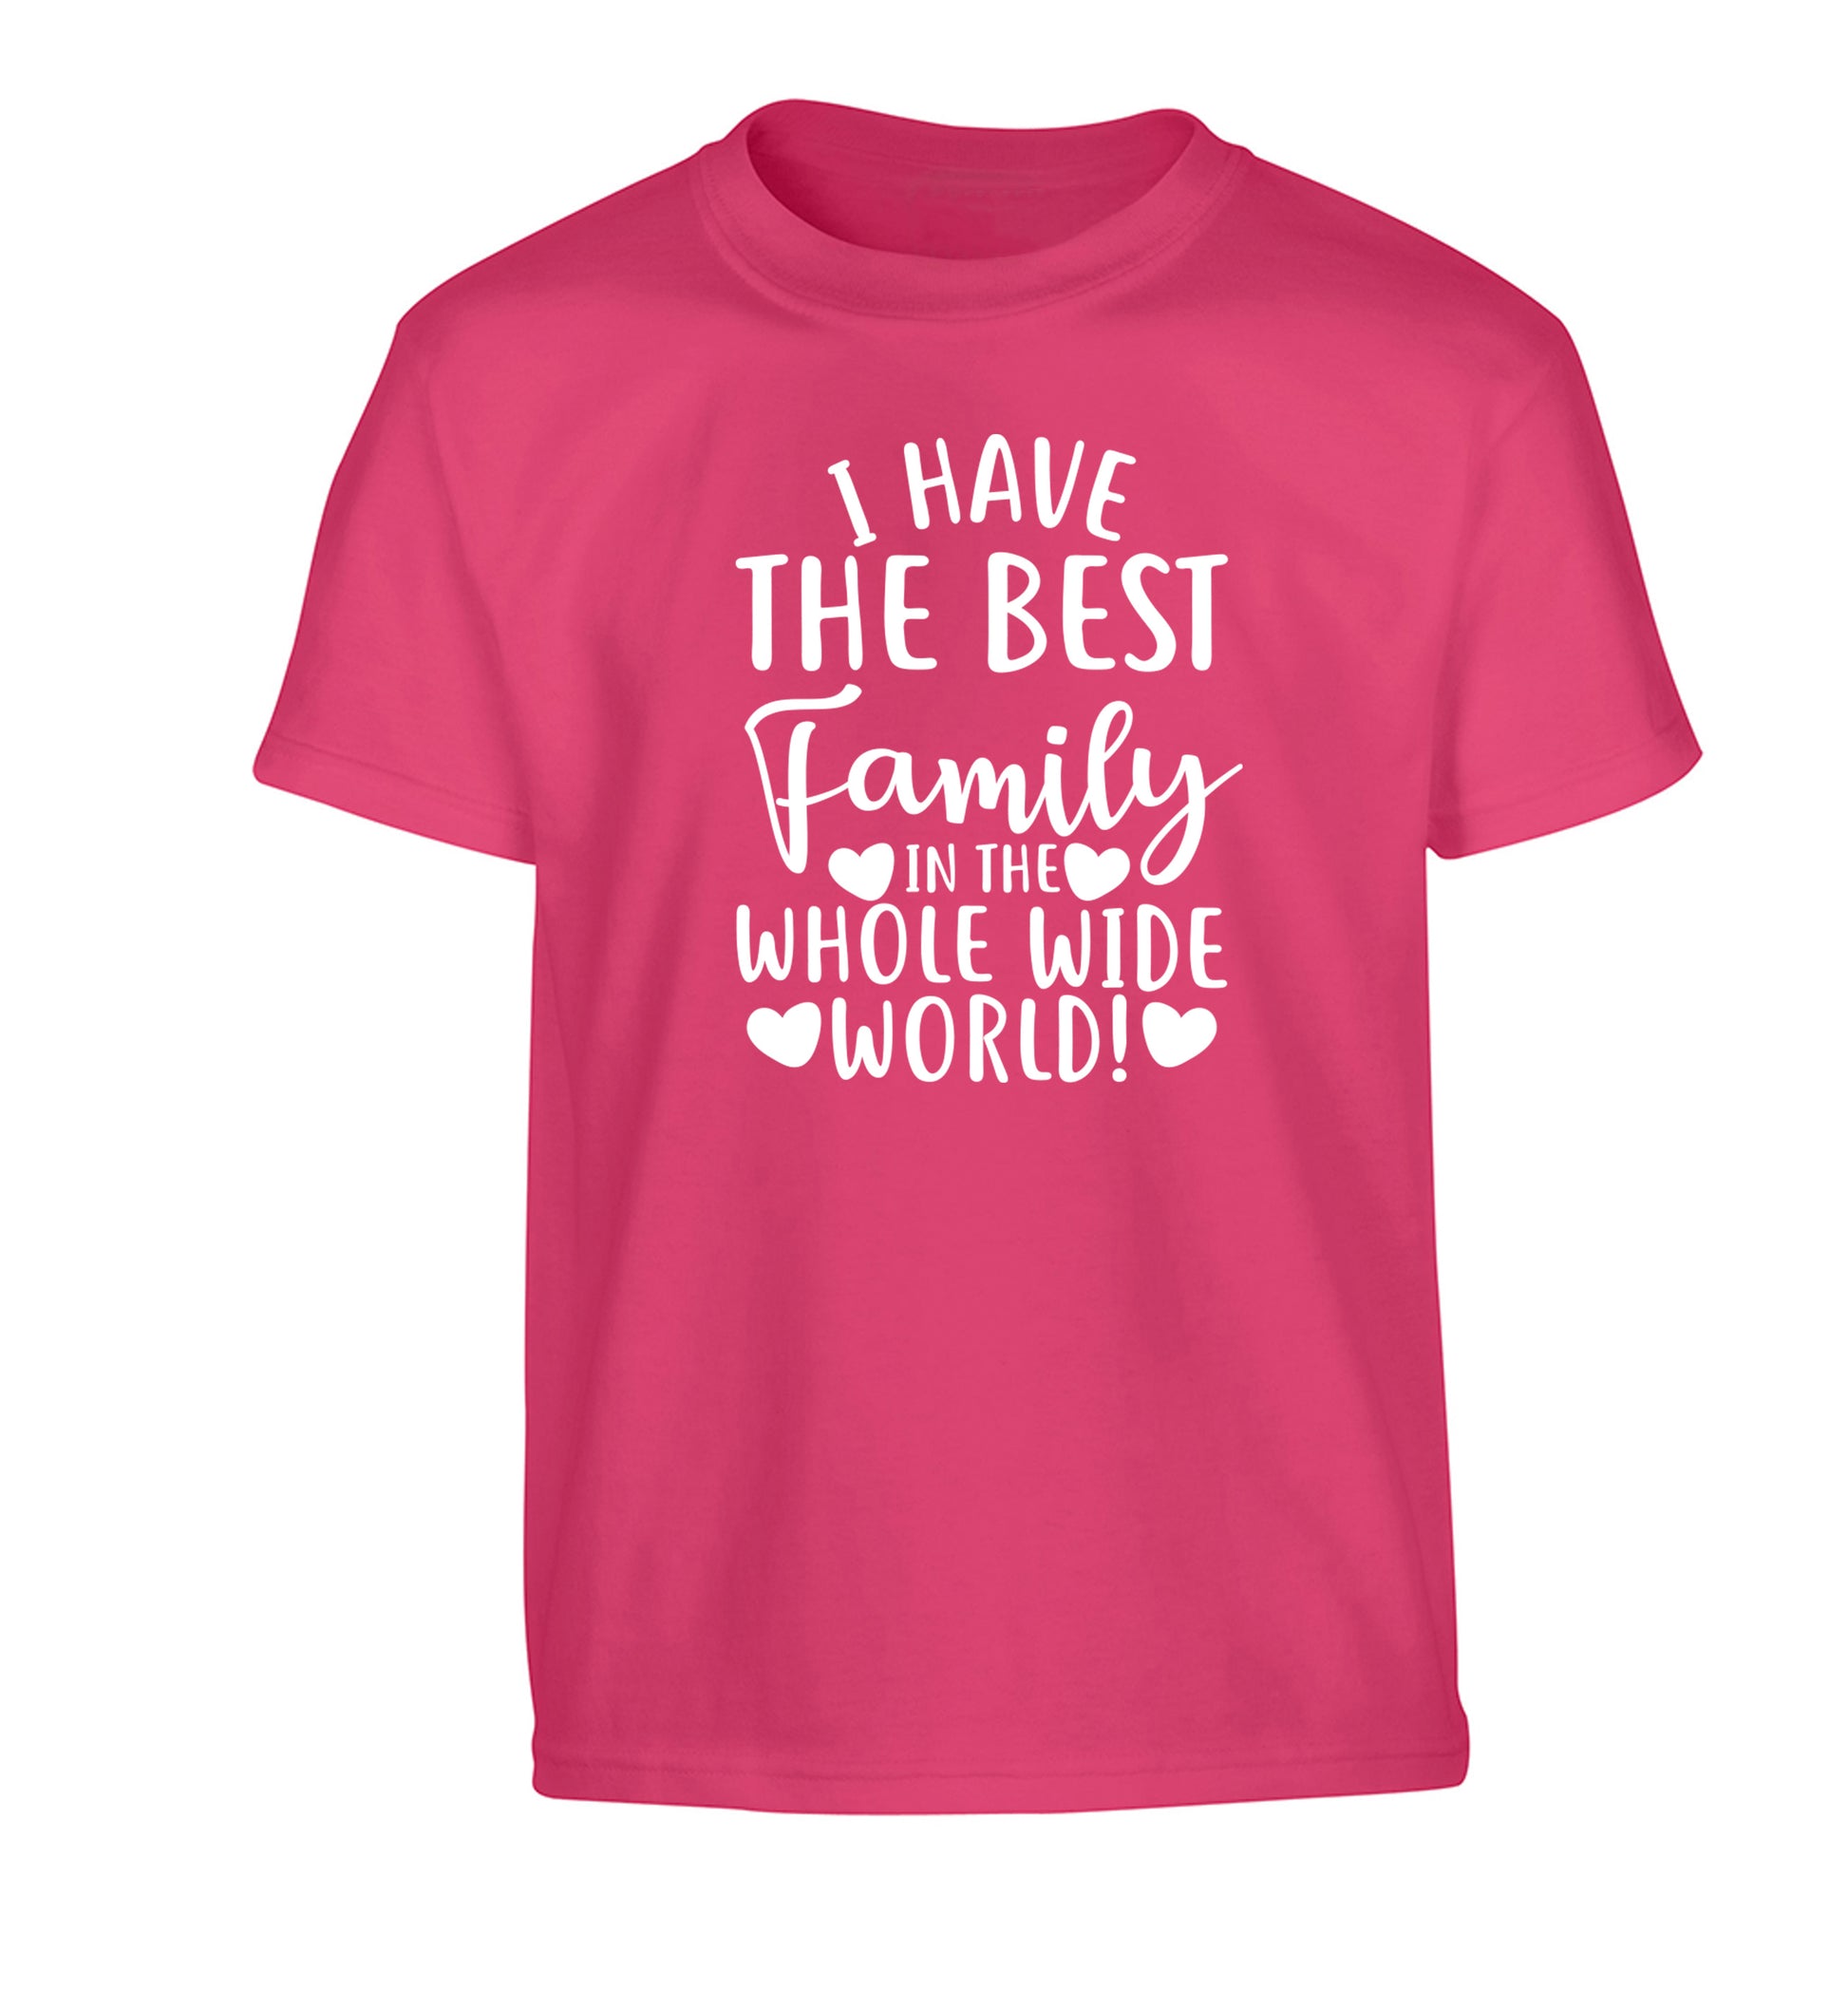 I have the best family in the whole wide world! Children's pink Tshirt 12-13 Years